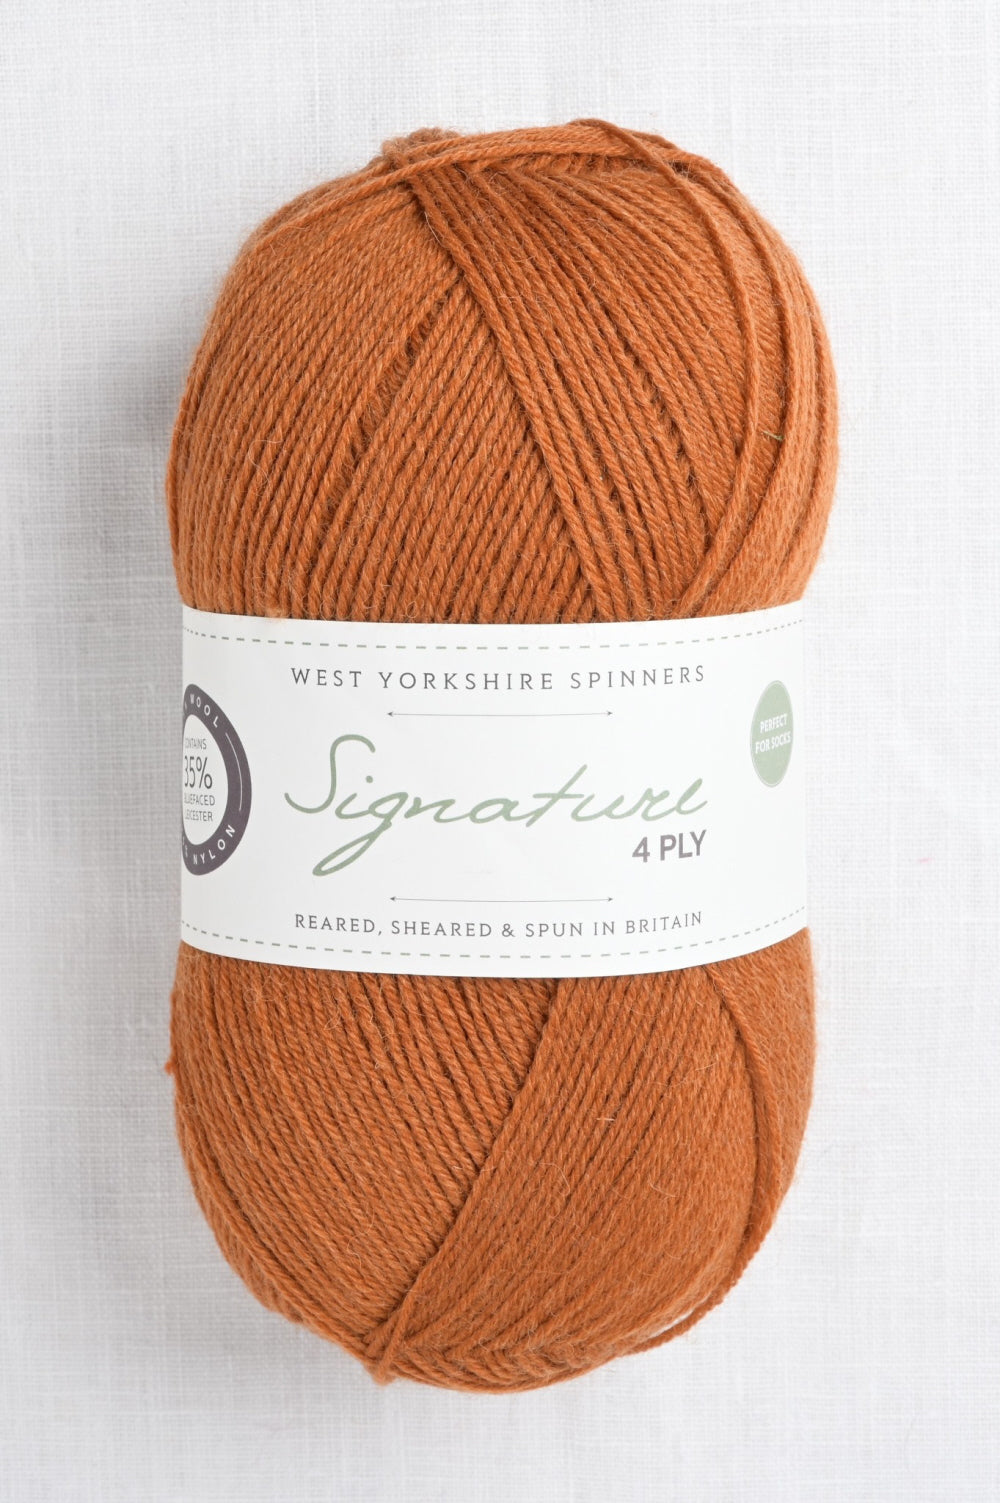 West Yorkshire Spinners Signature 4 Ply Yarn nutmeg